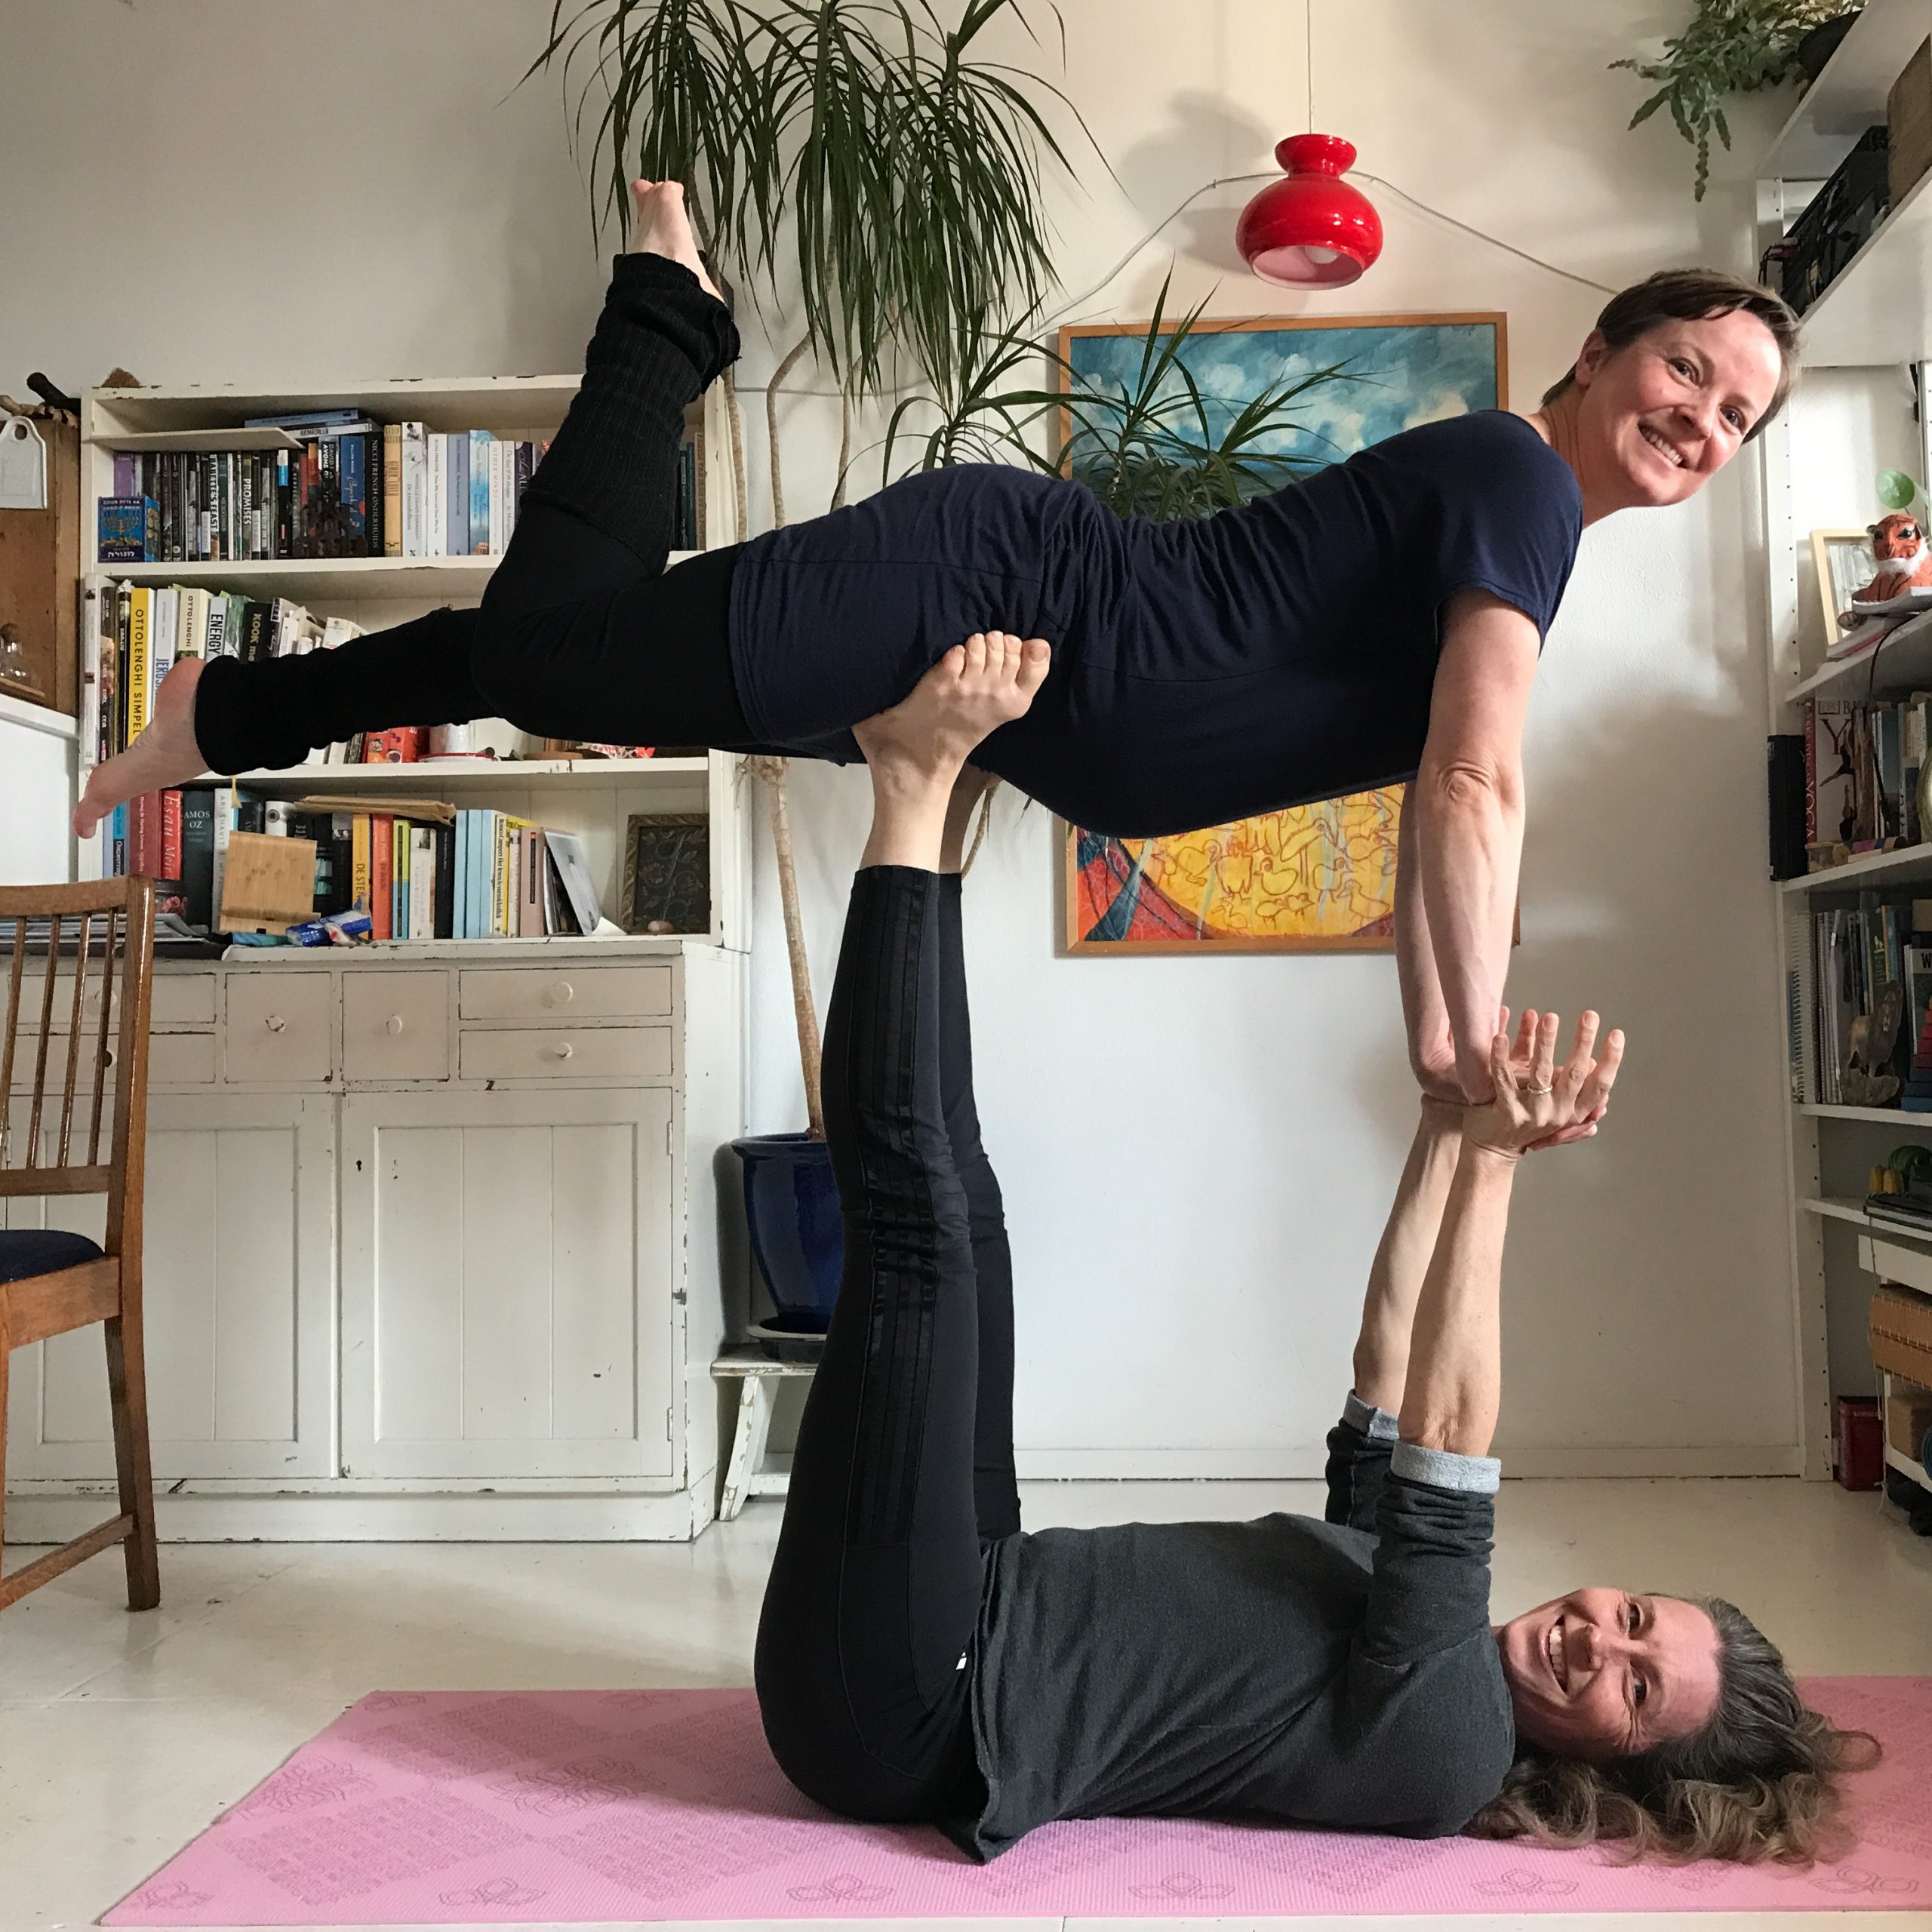 YourBody 360 - ACRO YOGA 💙💚 Acro yoga can be quite difficult at times but  it can also be immensely fun and rewarding. Sometimes your body can do it  but your mind